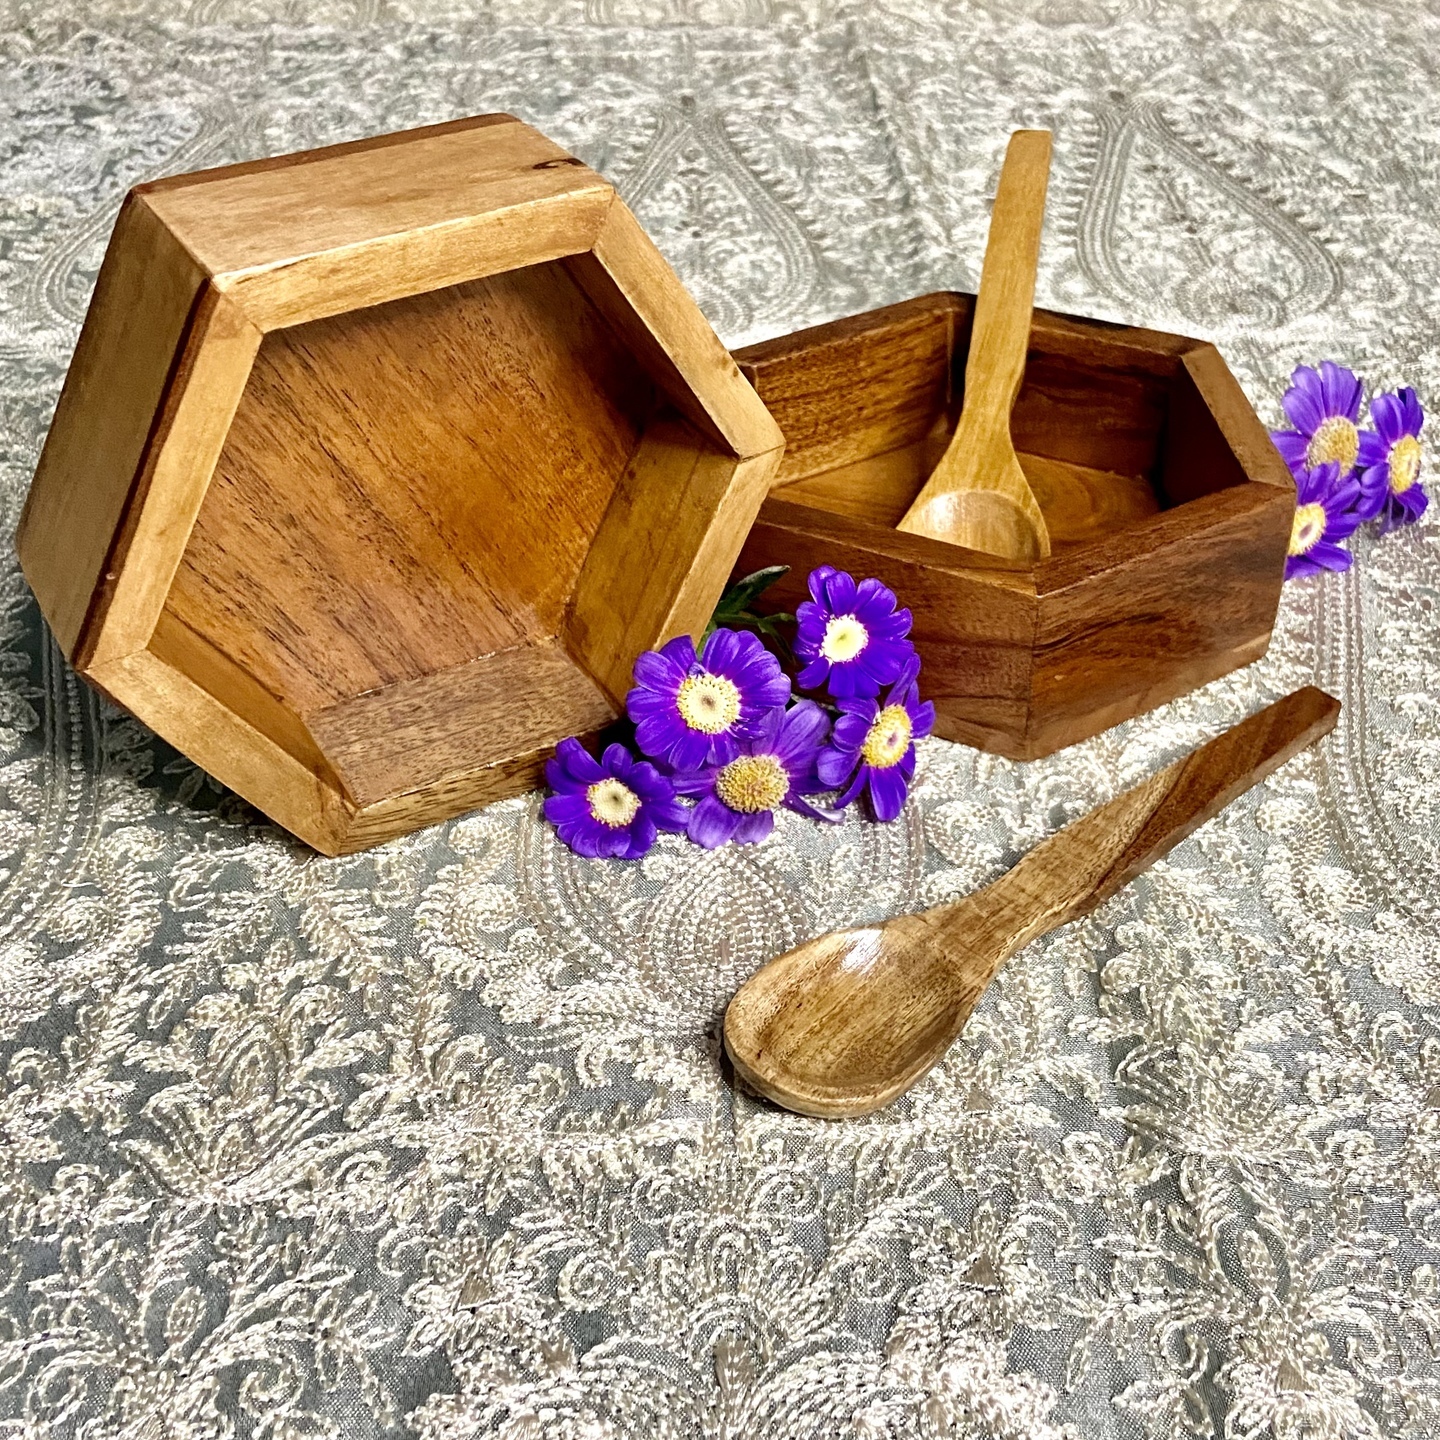 Hexagon Wooden Snack Bowls with Spoons